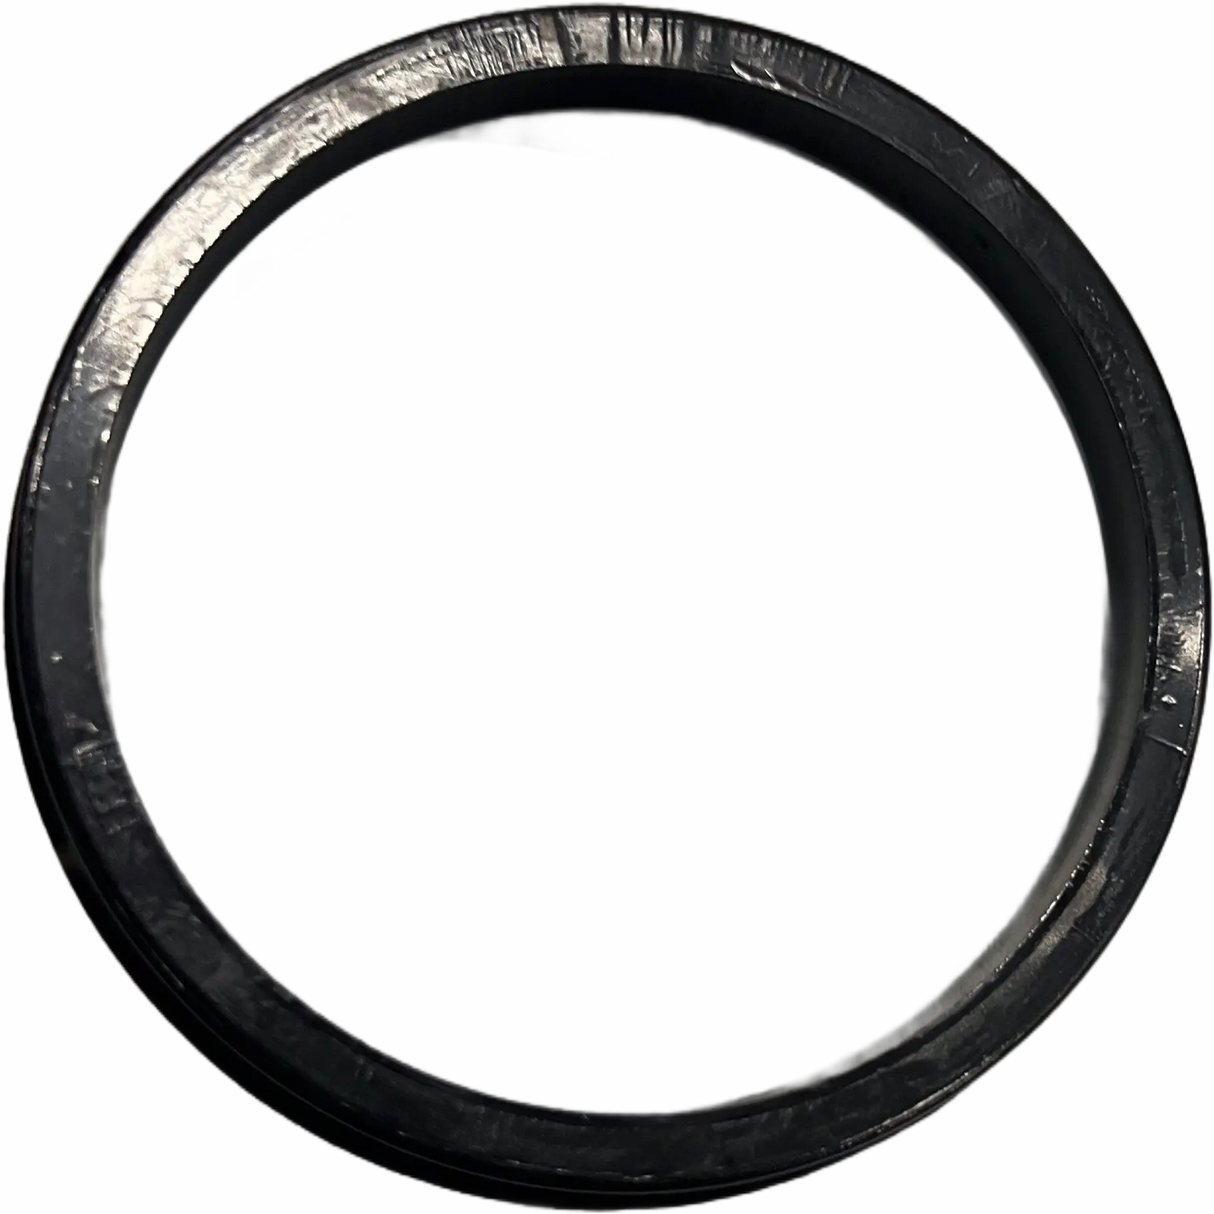 4x centering ring 112.1 - 100.1 without edge